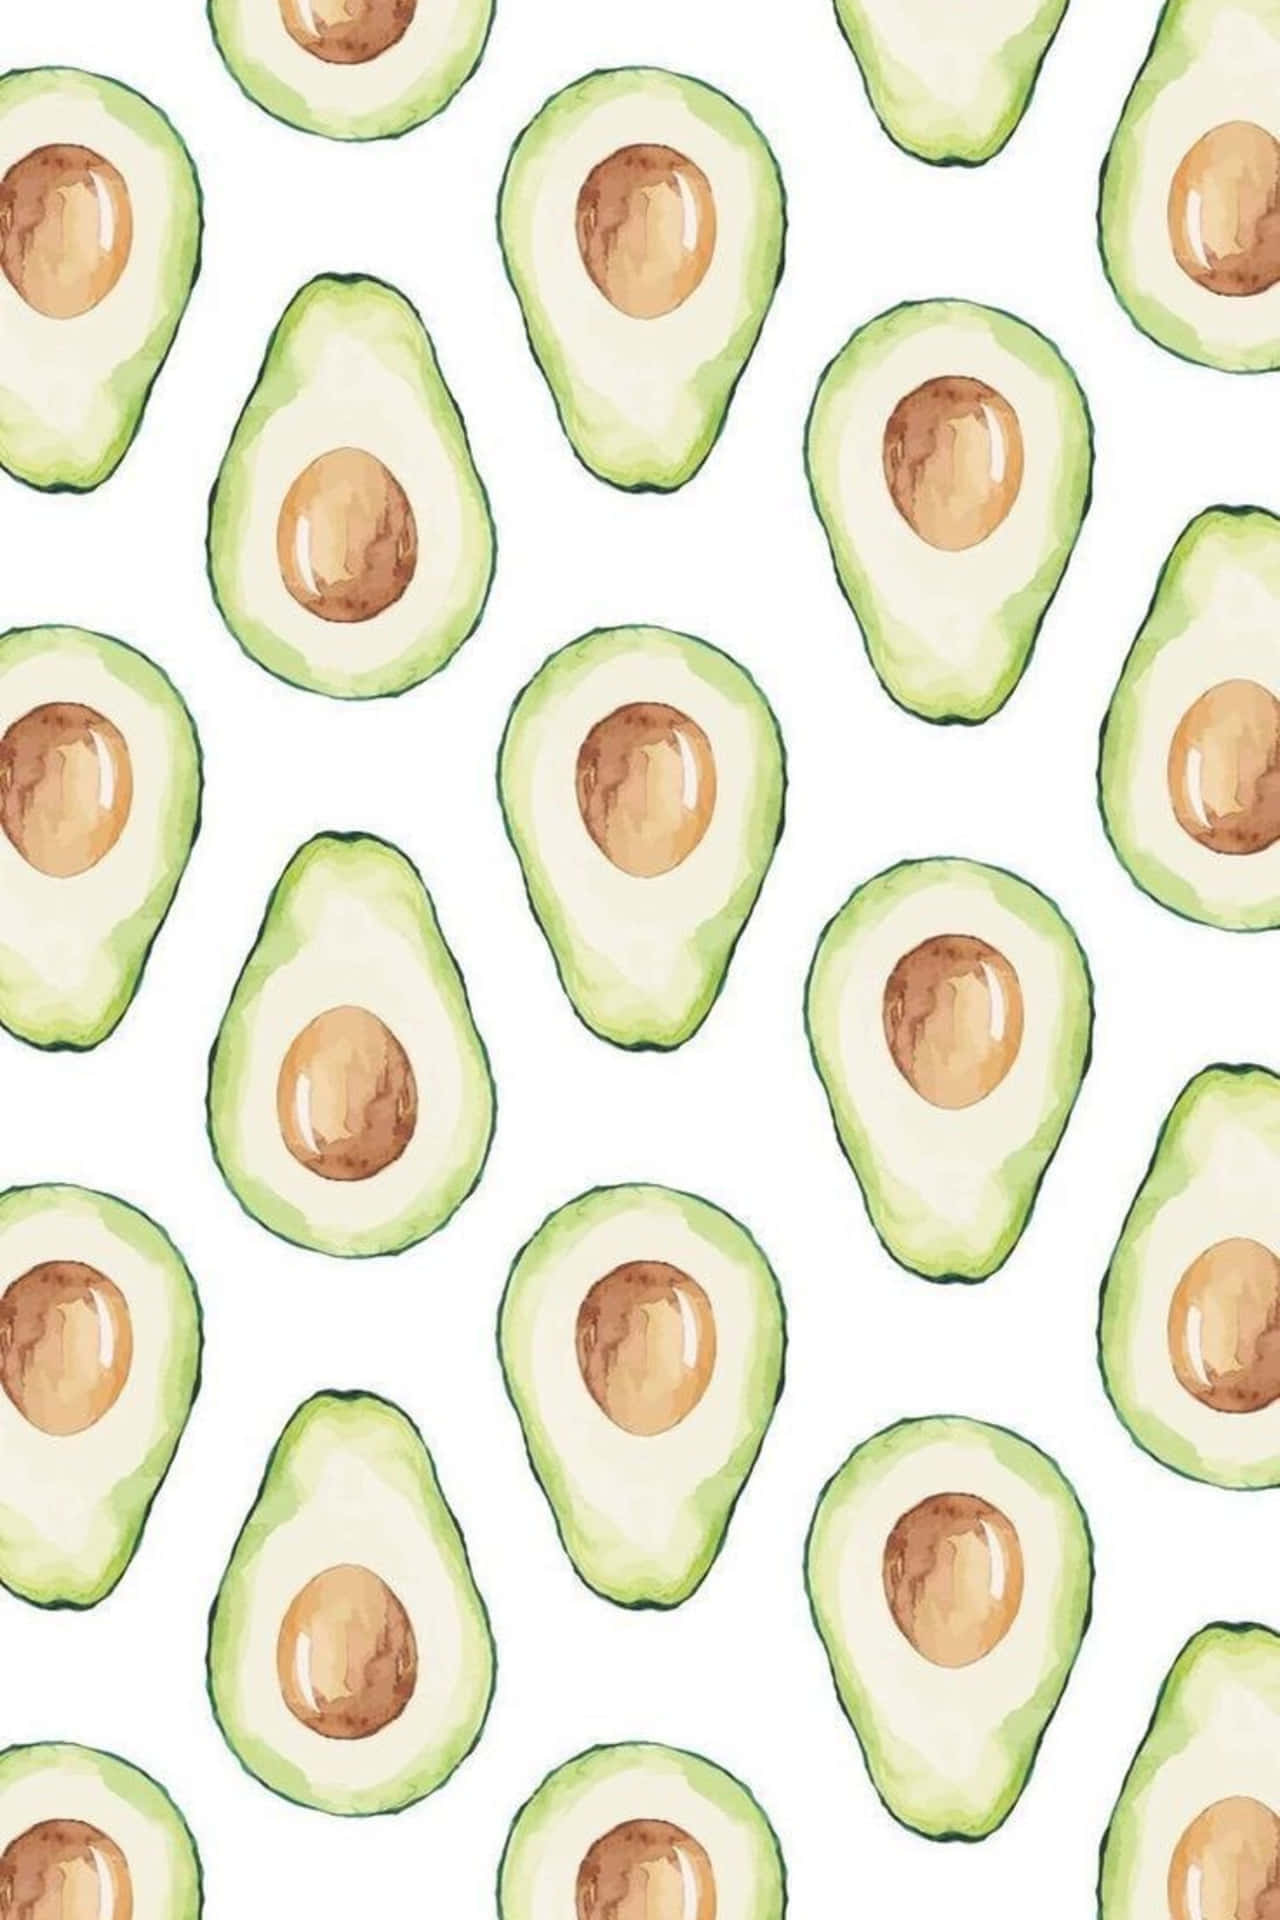 Feed your tech cravings with this delicious avocado iphone wallpaper Wallpaper